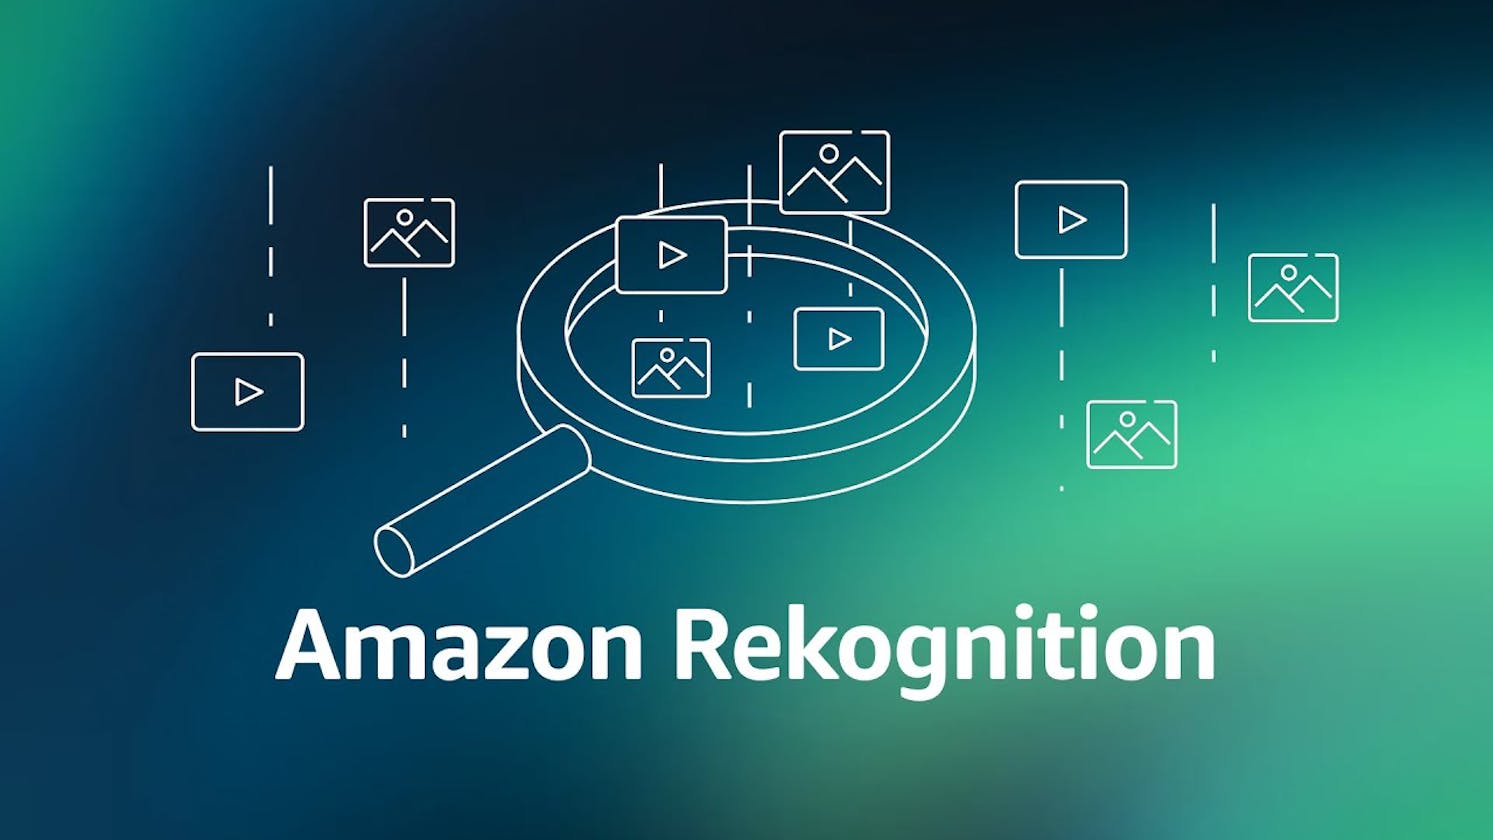 Amazon Rekognition on AWS: A Simple Guide with Examples